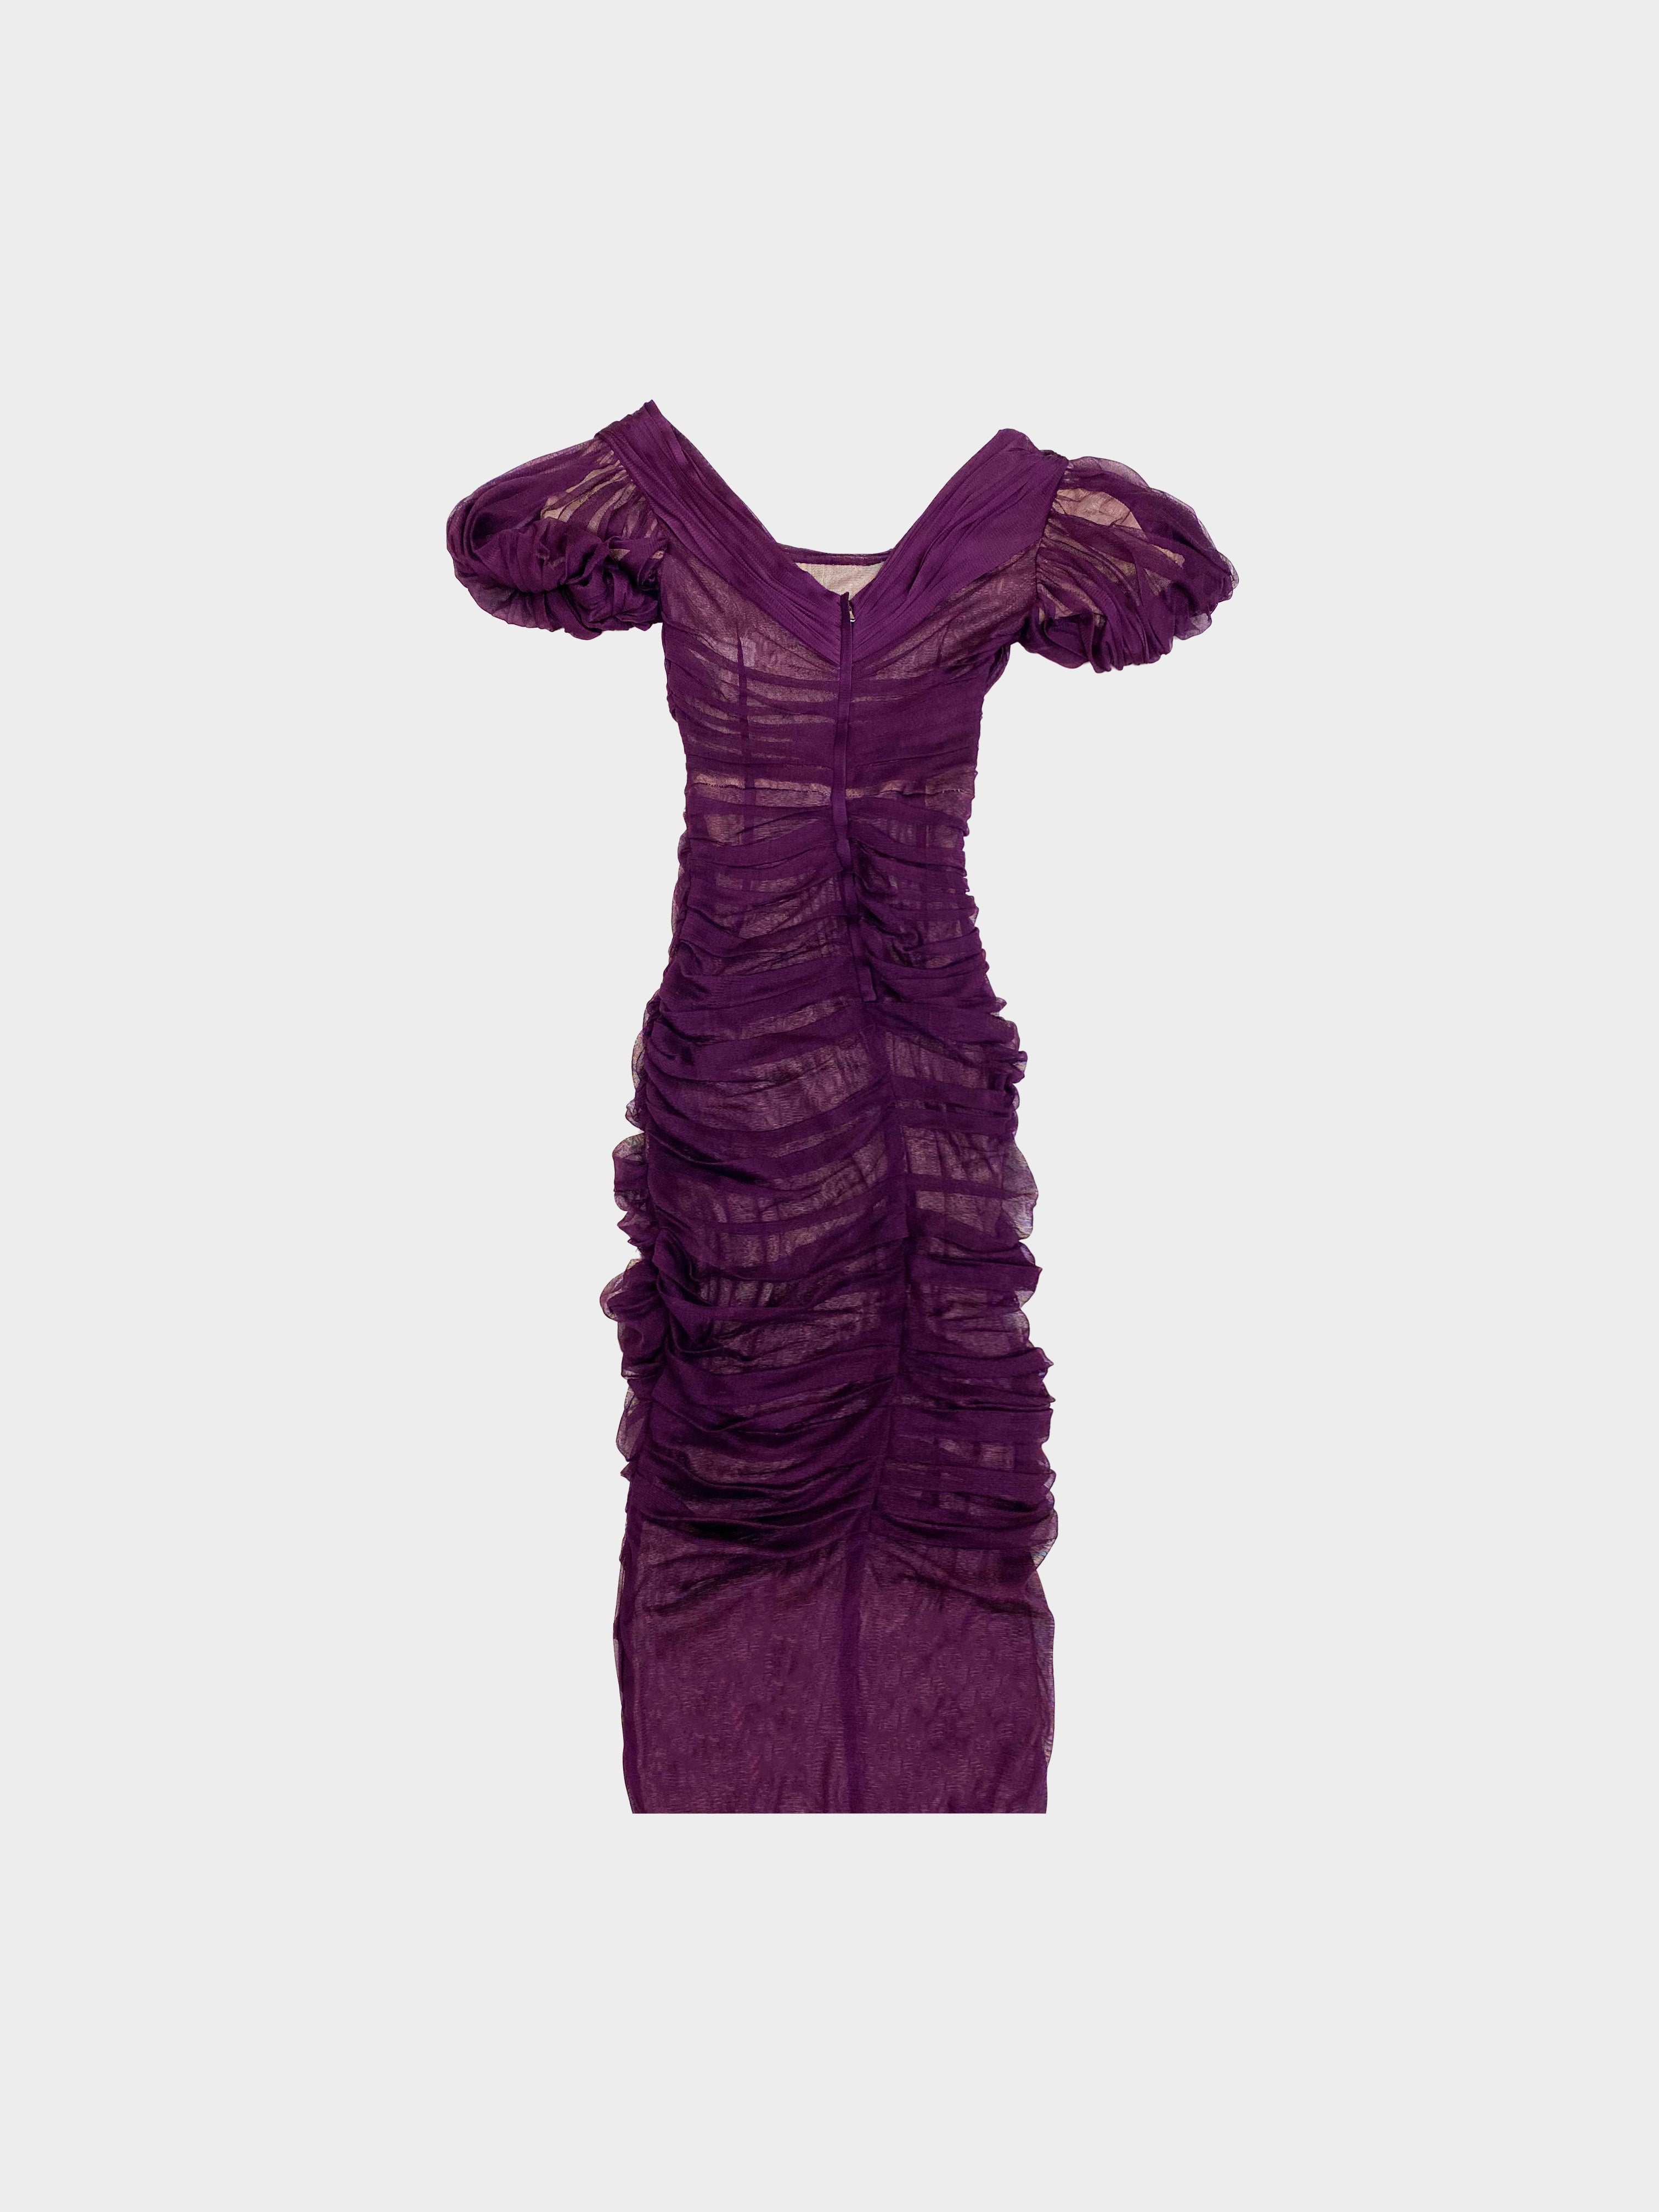 Dolce and Gabbana 2000s Purple Organza Ruched Dress